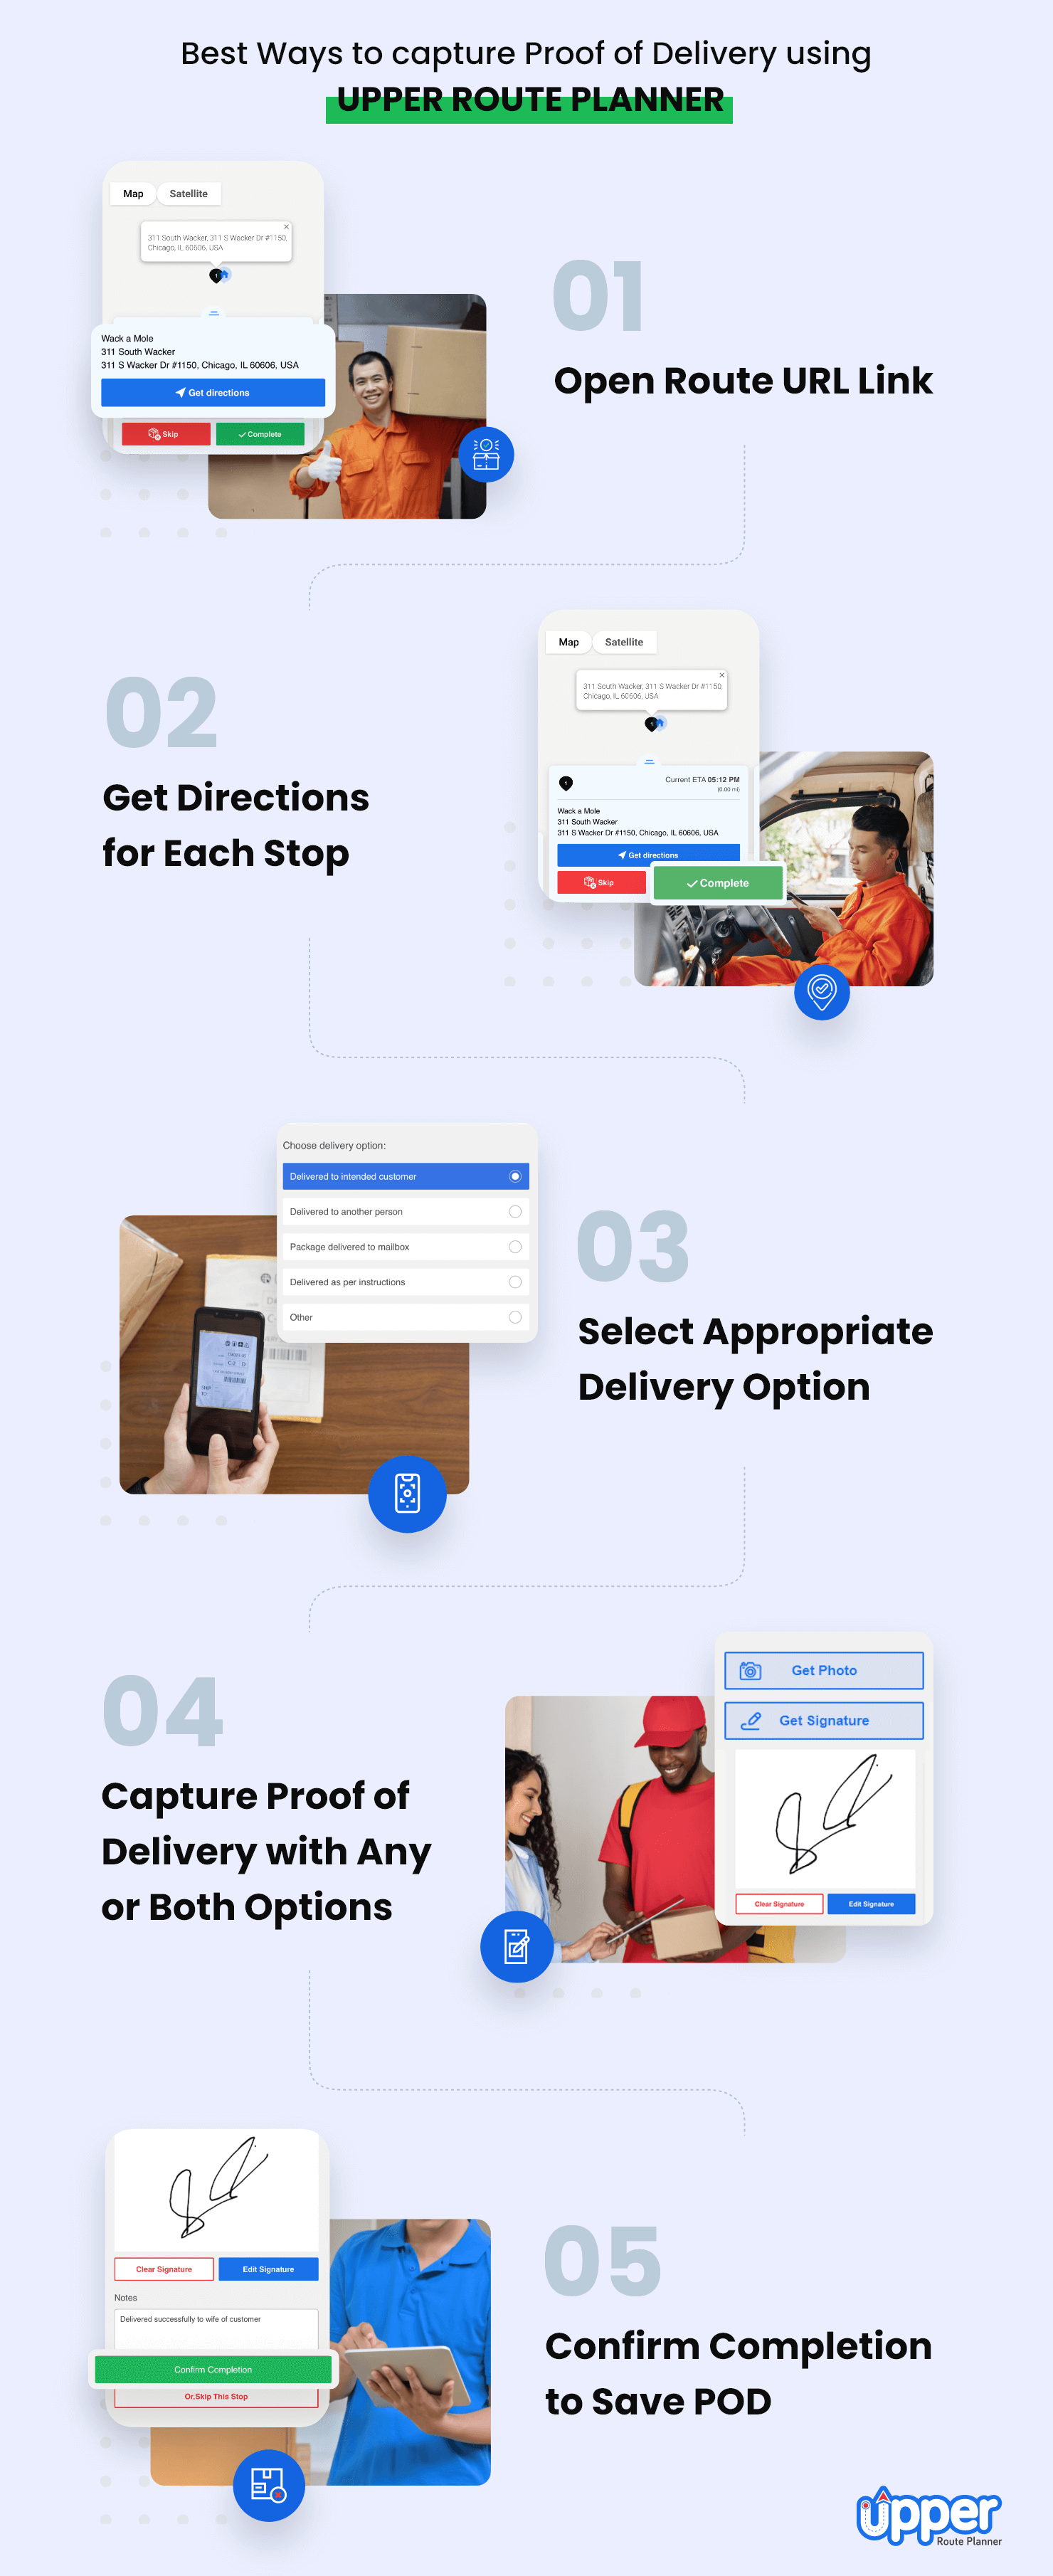 Best ways to capture proof of delivery using Upper Route Planner